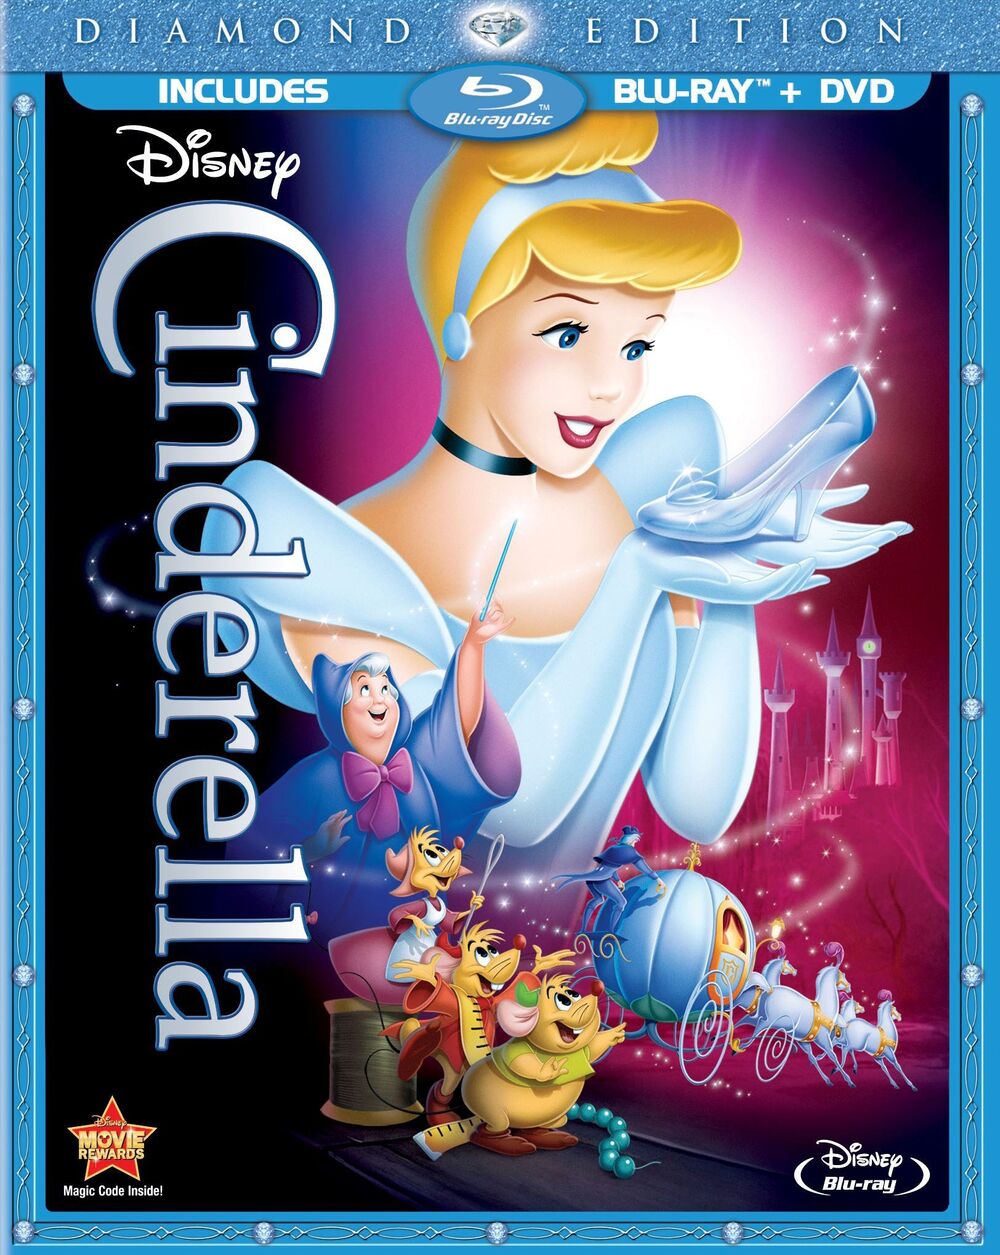 Cinderella is a modern fairy tale that isn't a waste of time